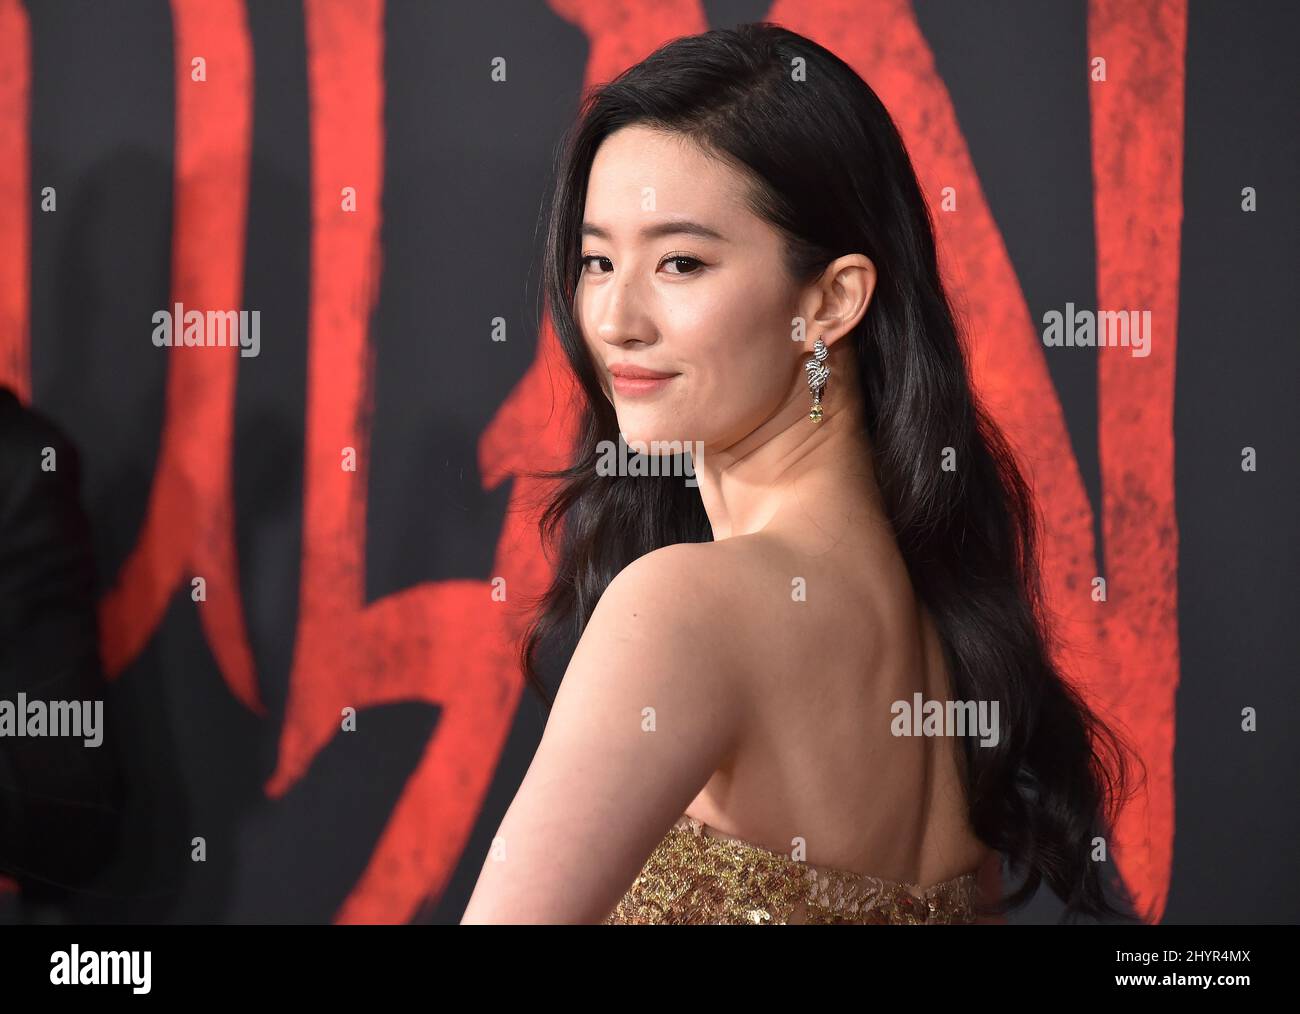 Yifei Liu attending Disney's Mulan World Premiere held at Hollywood, USA on Monday March 9, 2020. Stock Photo